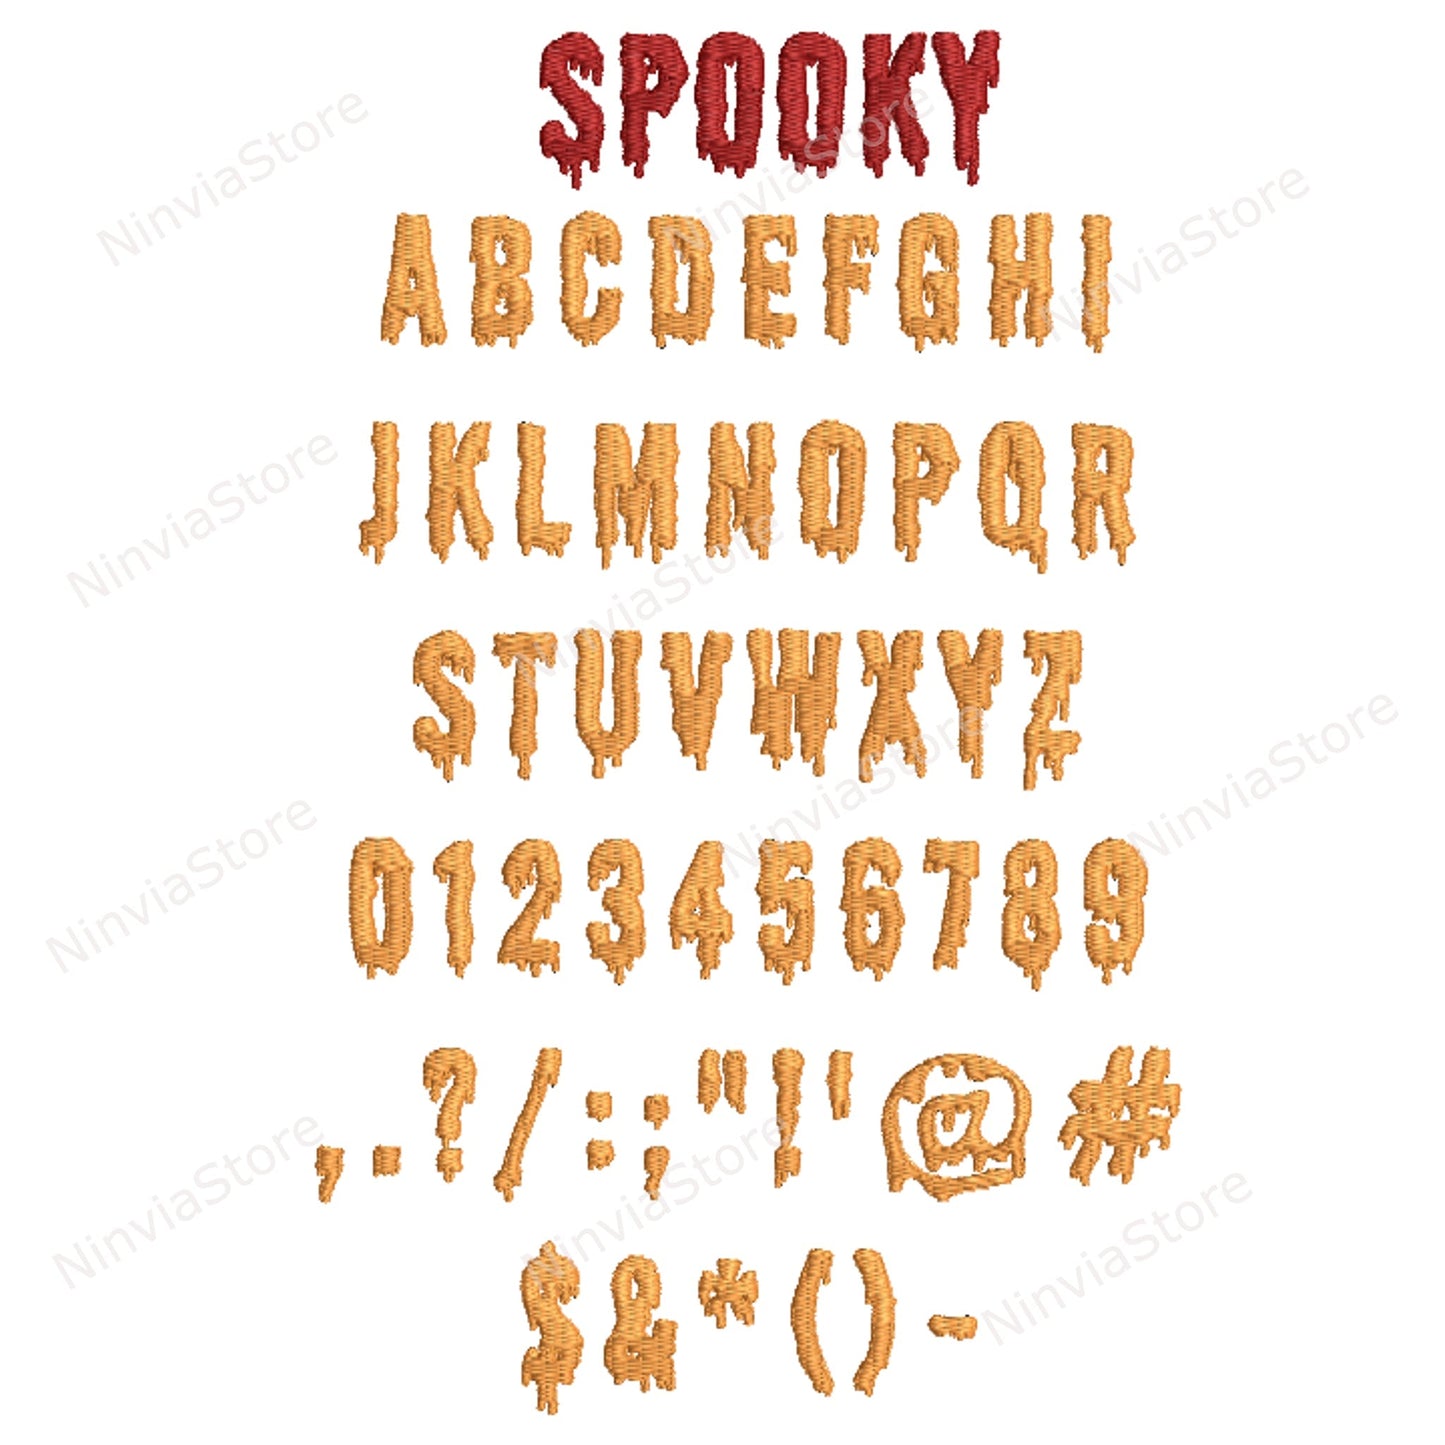 7 HUS Halloween Embroidery Fonts Bundle, Kids Font HUS, Machine Embroidery Font HUS, Monster HUS font for Embroidery